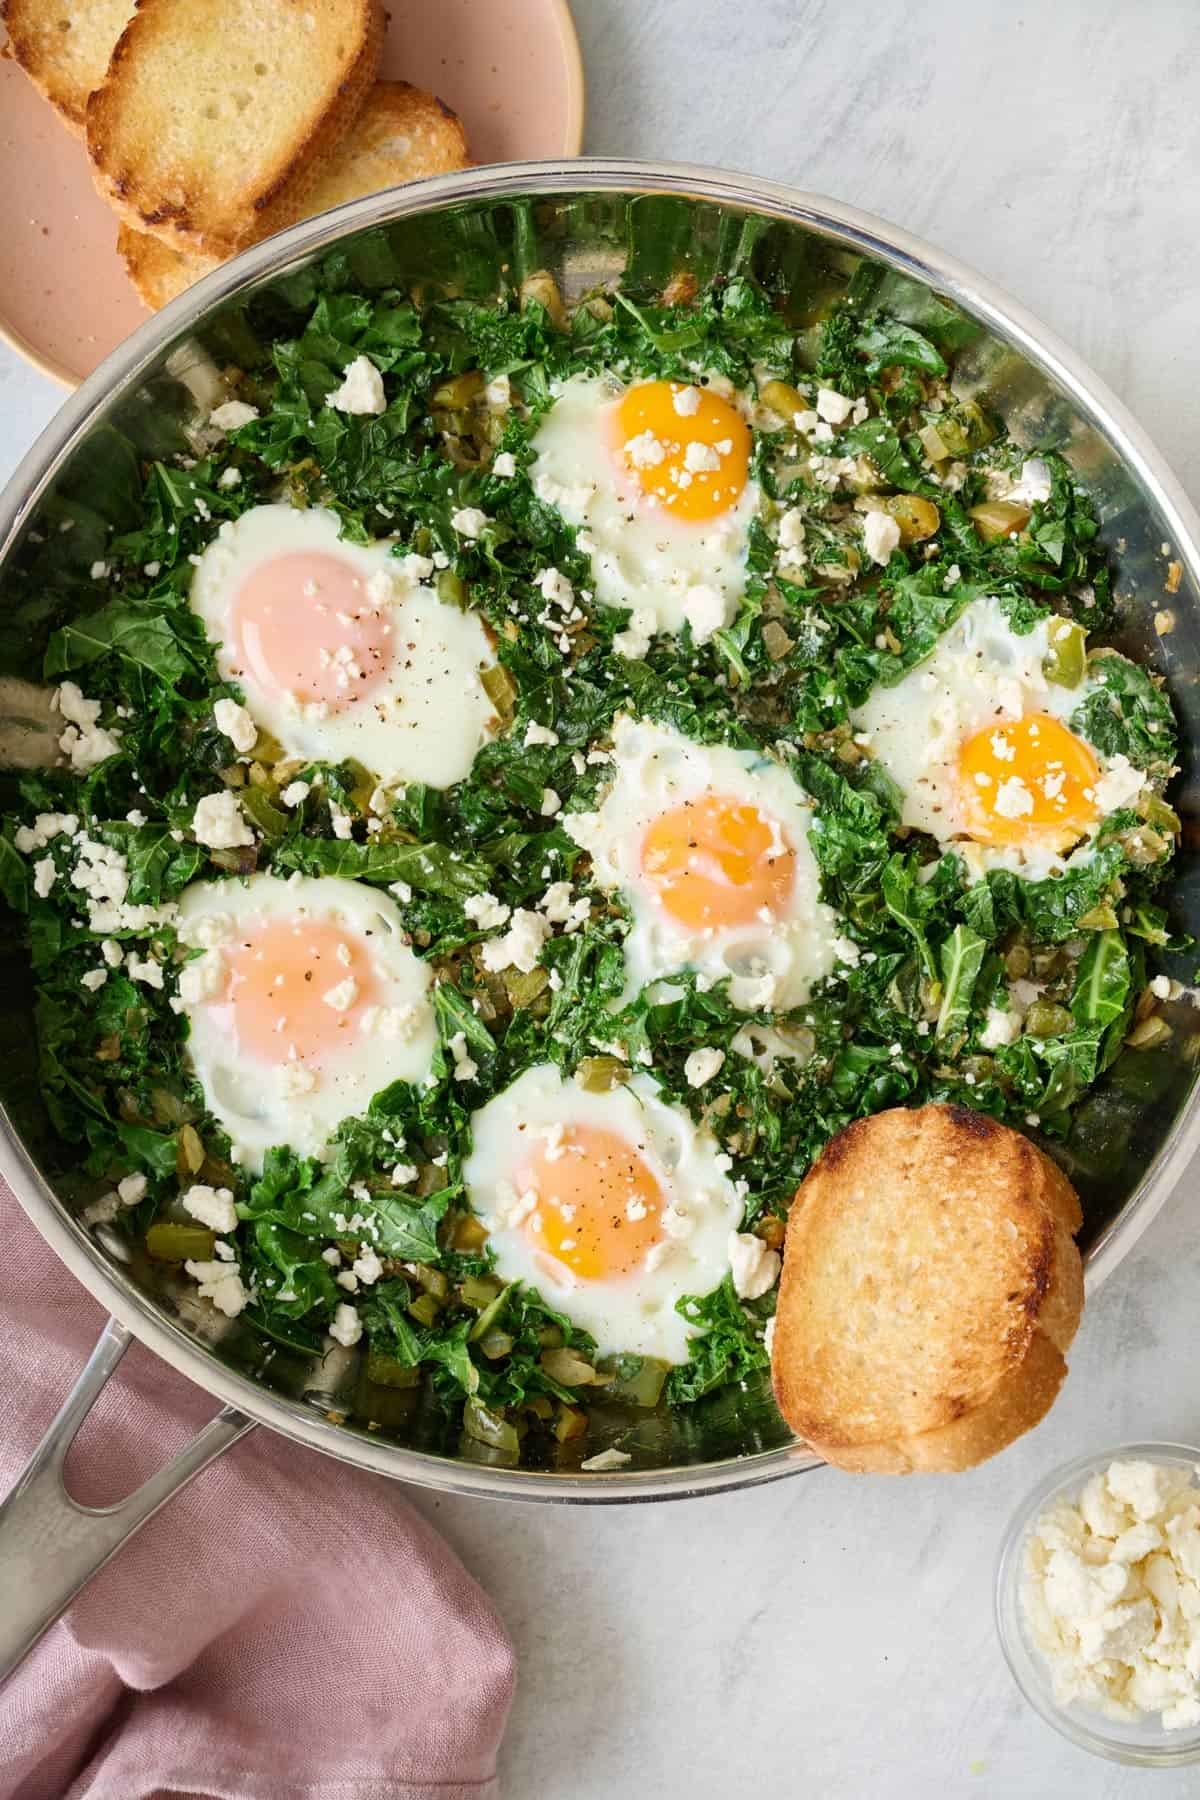 Skillet with sautéed greens and four sunny-side-up eggs, served with toast on the side